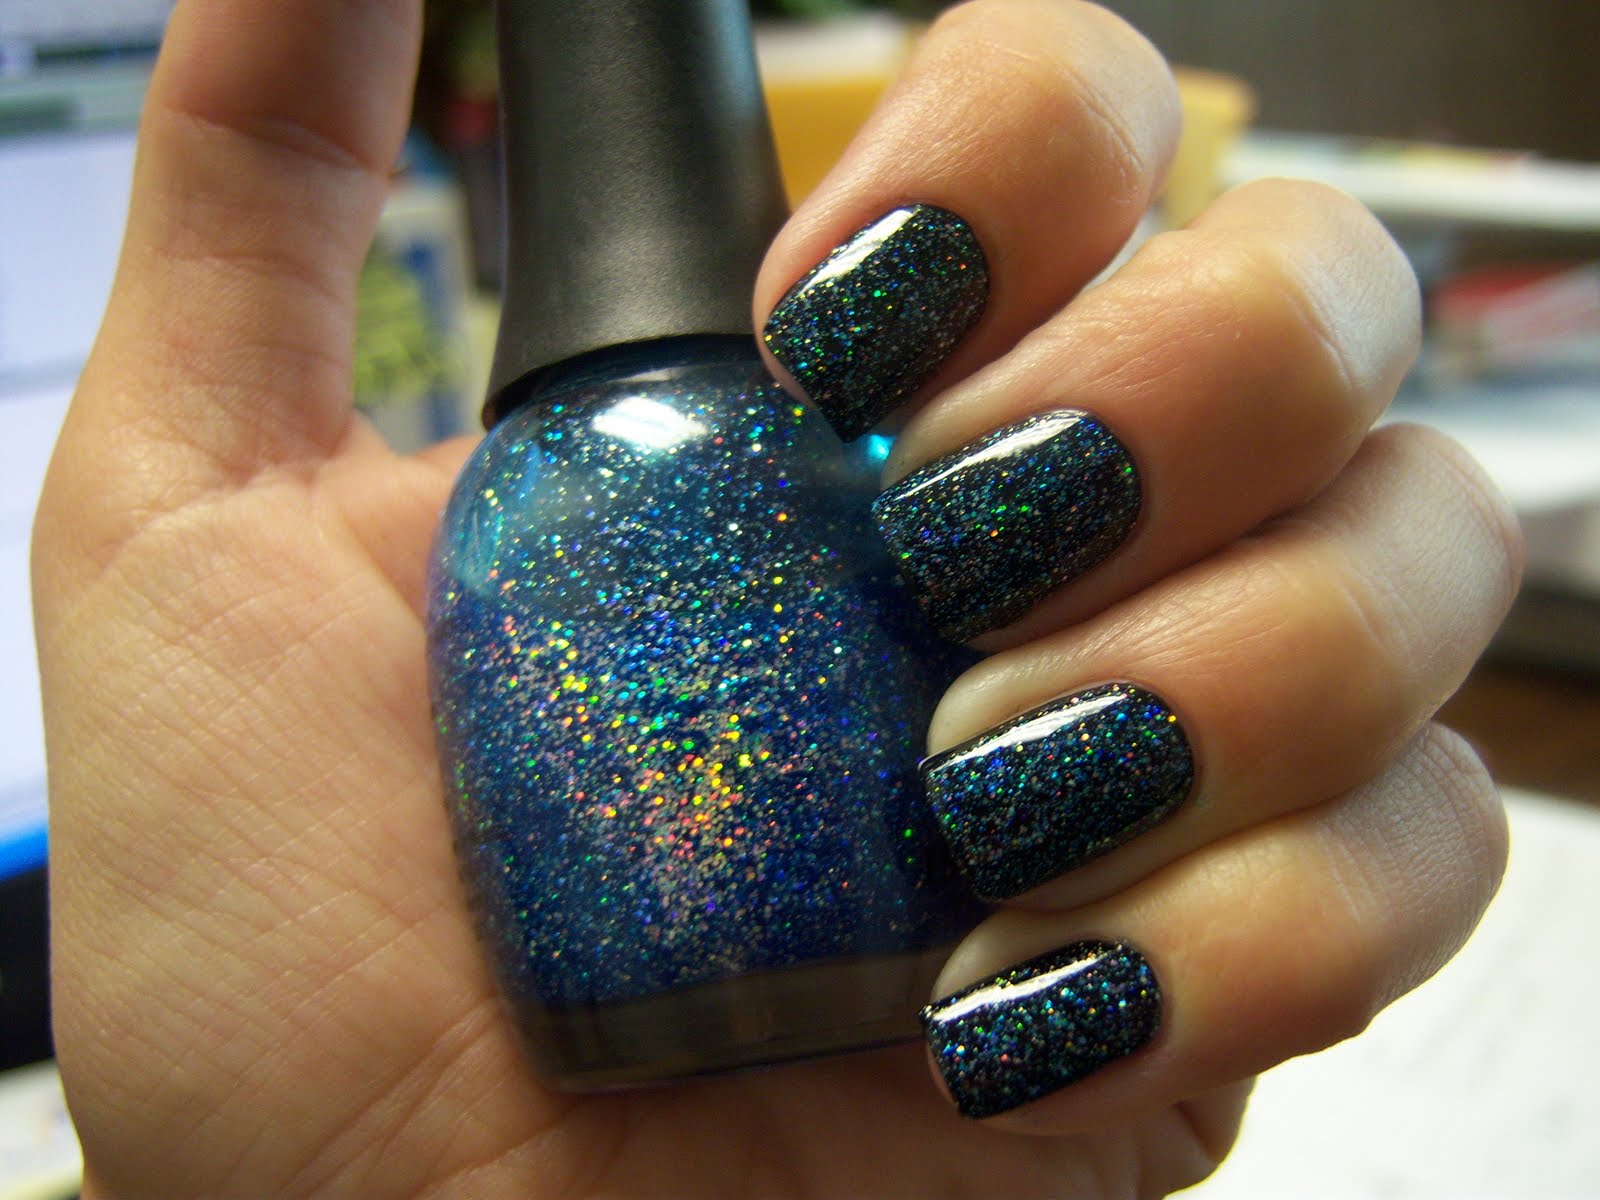 Chloe's Nails: NOTD - Finger Paints Sapphire Shimmer Funky French